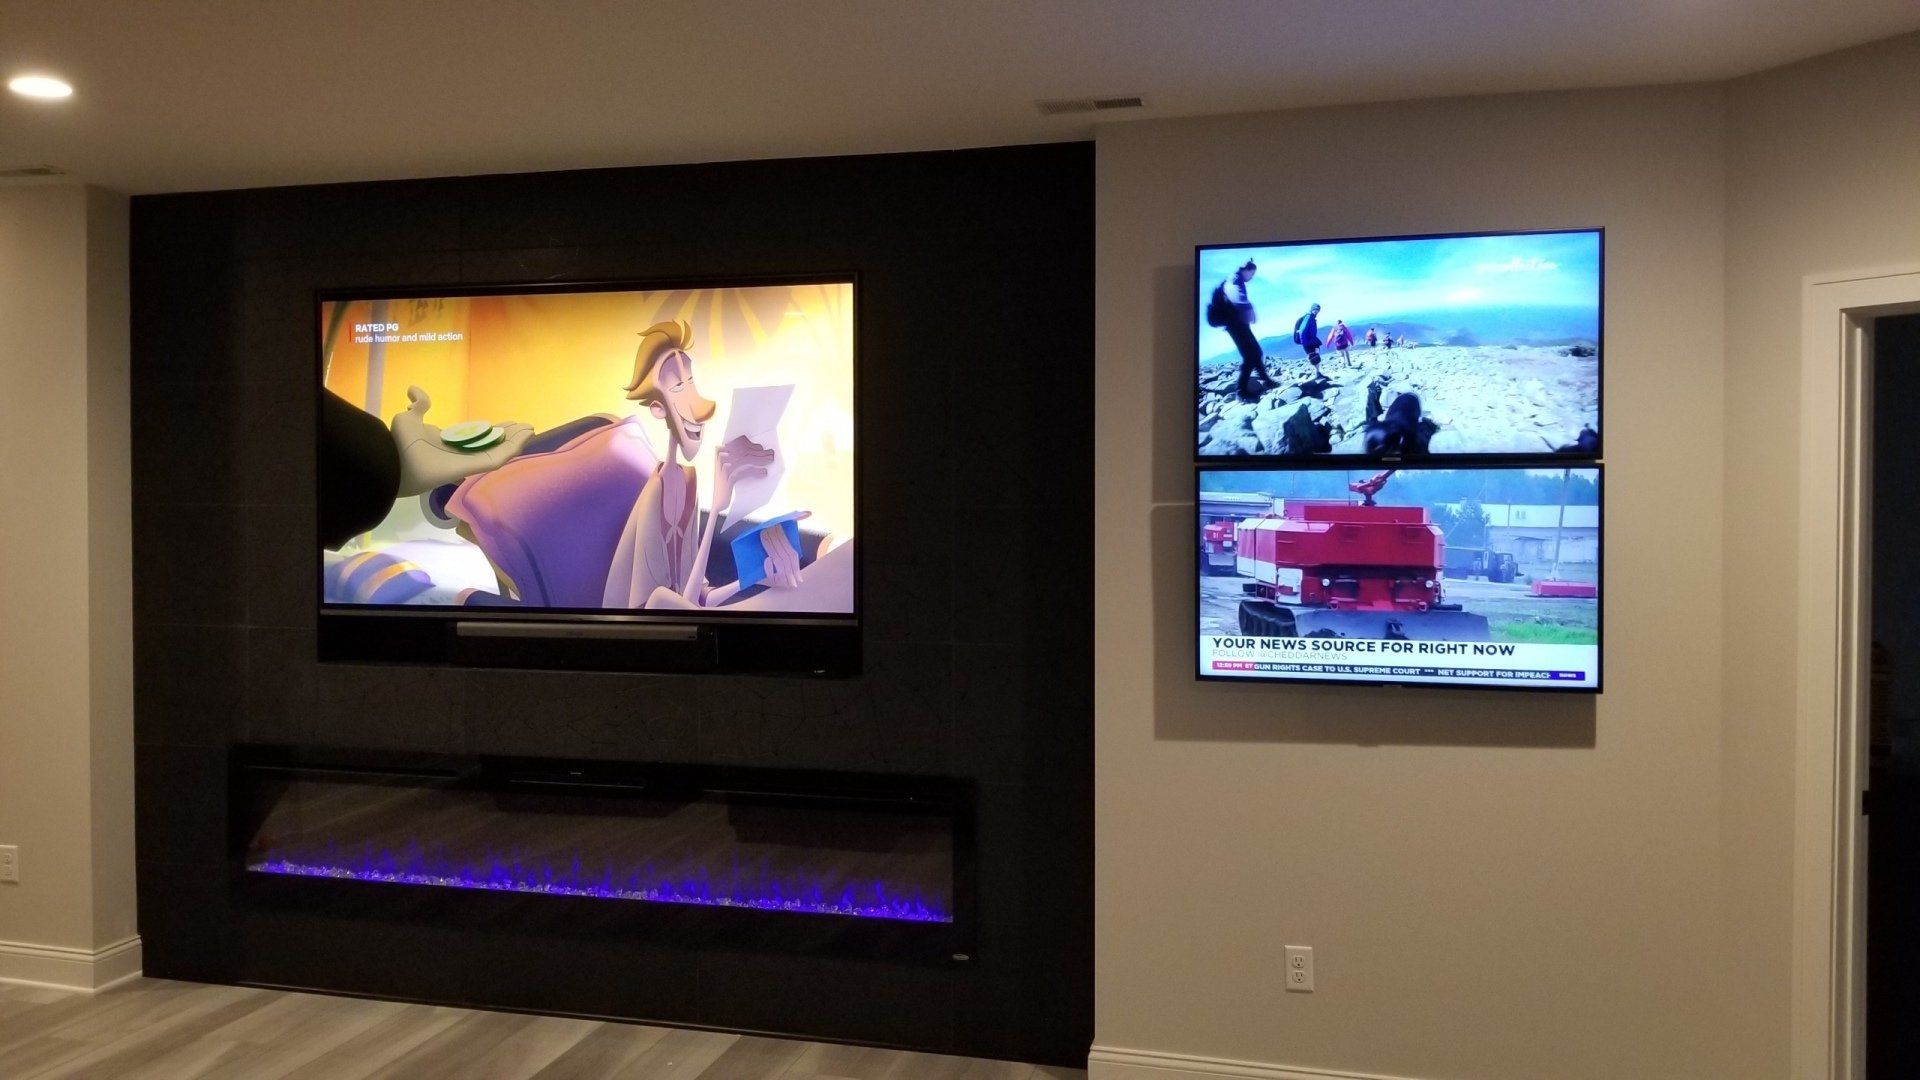 three televisions are mounted on a wall with a sonos home theater installed by fisher electronics in northern ohio.